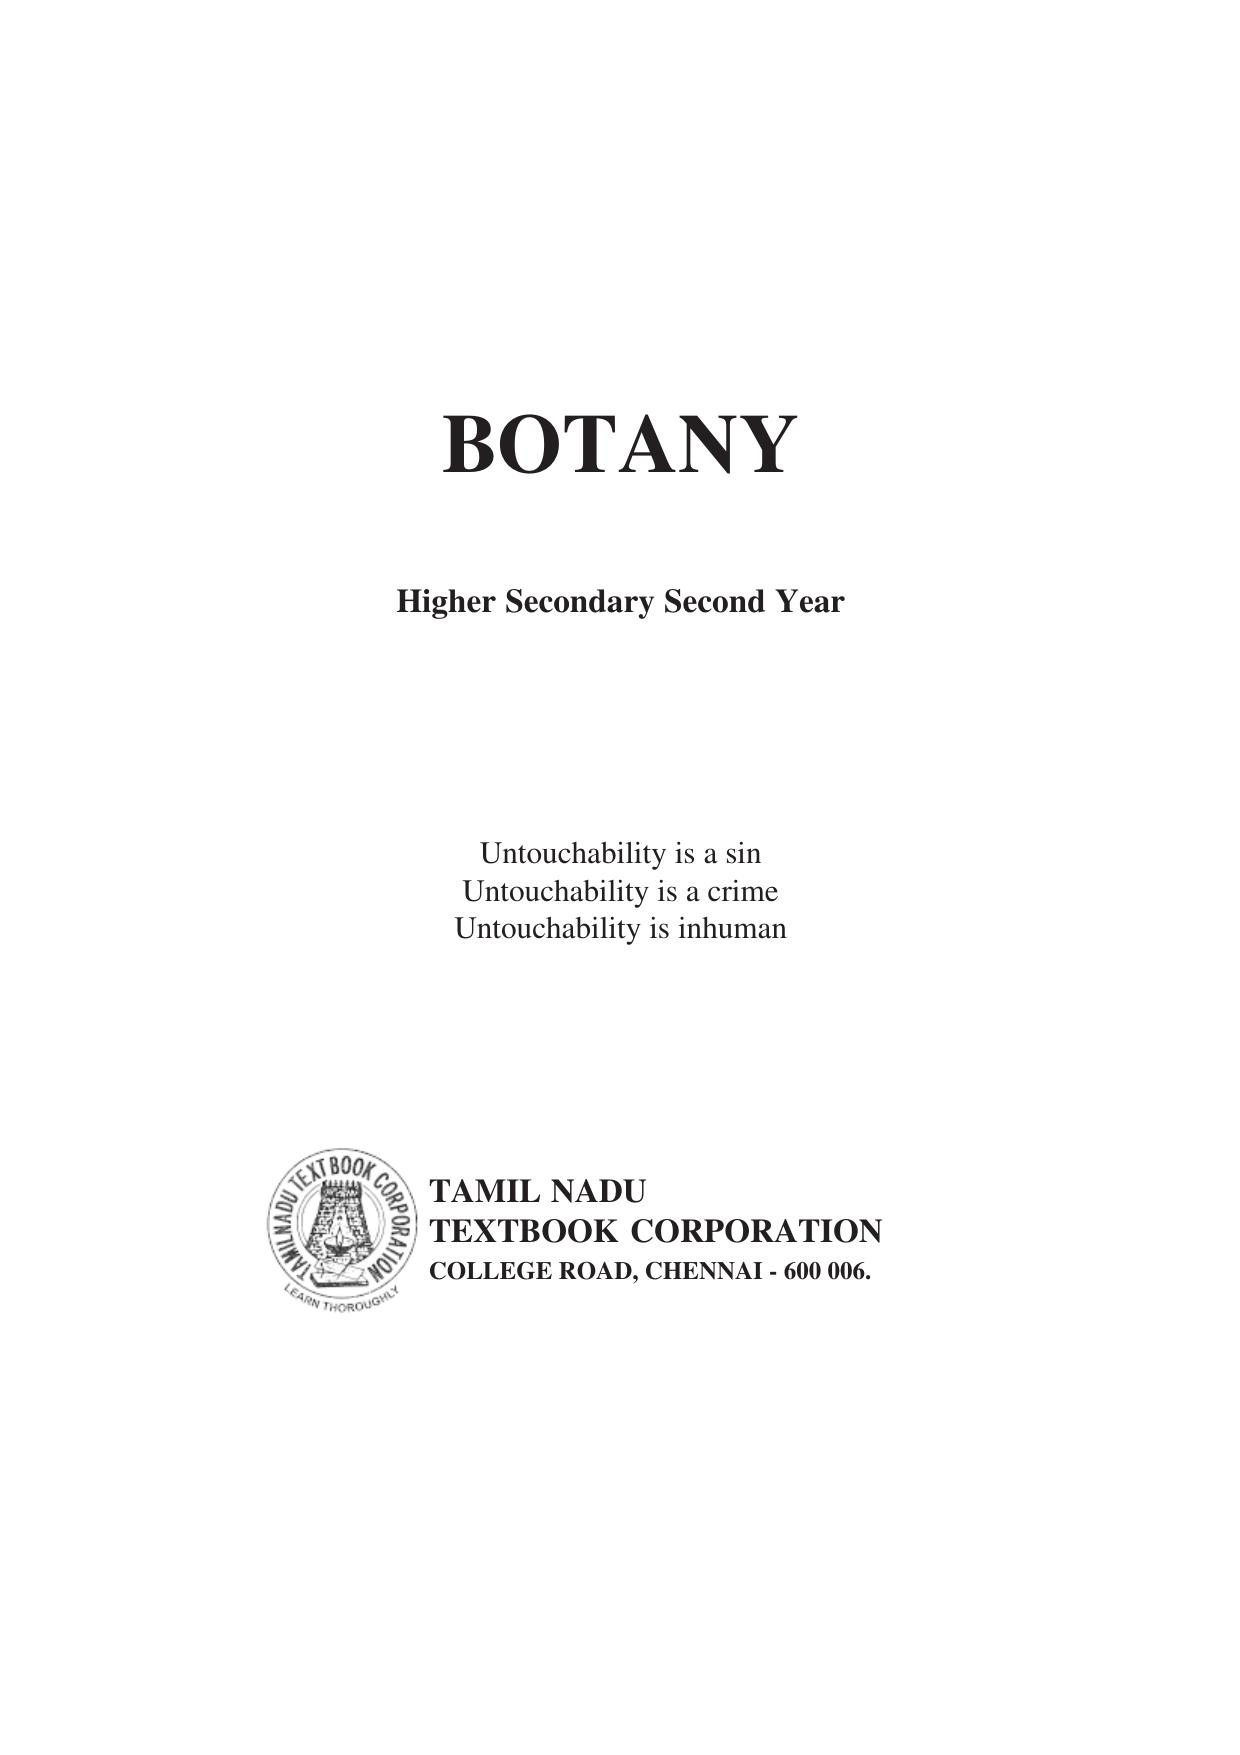 BOTANY Higher Secondary Second Year